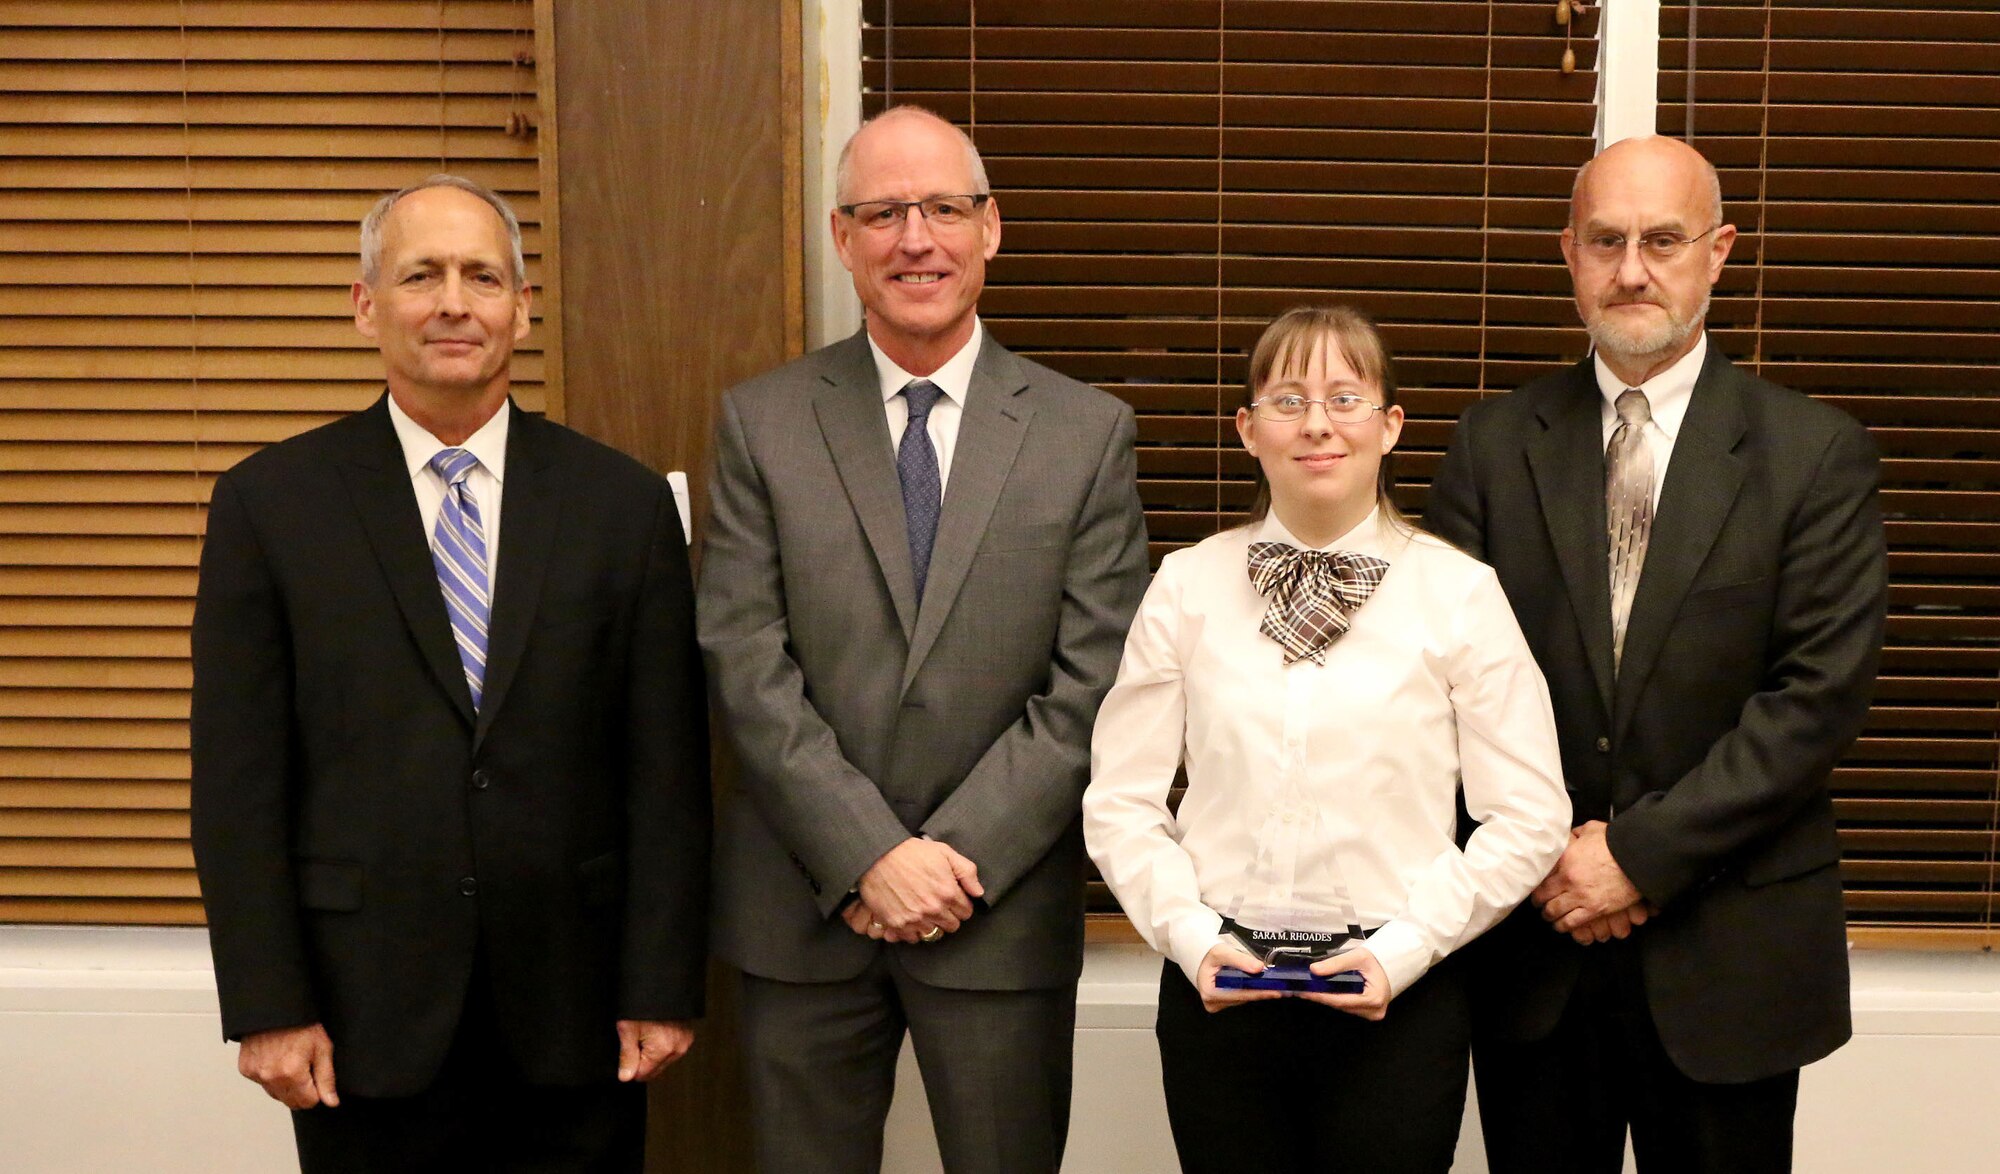 Facility Engineer/Scientist II Sara Rhoades (third from left) receives the Science and Technology Professional of the Year Award during the National Aerospace Solutions, LLC Salute to Excellence Annual Award Ceremony Nov. 14, 2018, at the Arnold Lakeside Center, Arnold Air Force Base, Tenn. Also pictured from left is NAS Deputy General Manager Michael Belzil, NAS General Manager Richard Tighe and NAS Technology Innovation Branch Manager Mark Brandon. (U.S. Air Force photo by Bradley Hicks)